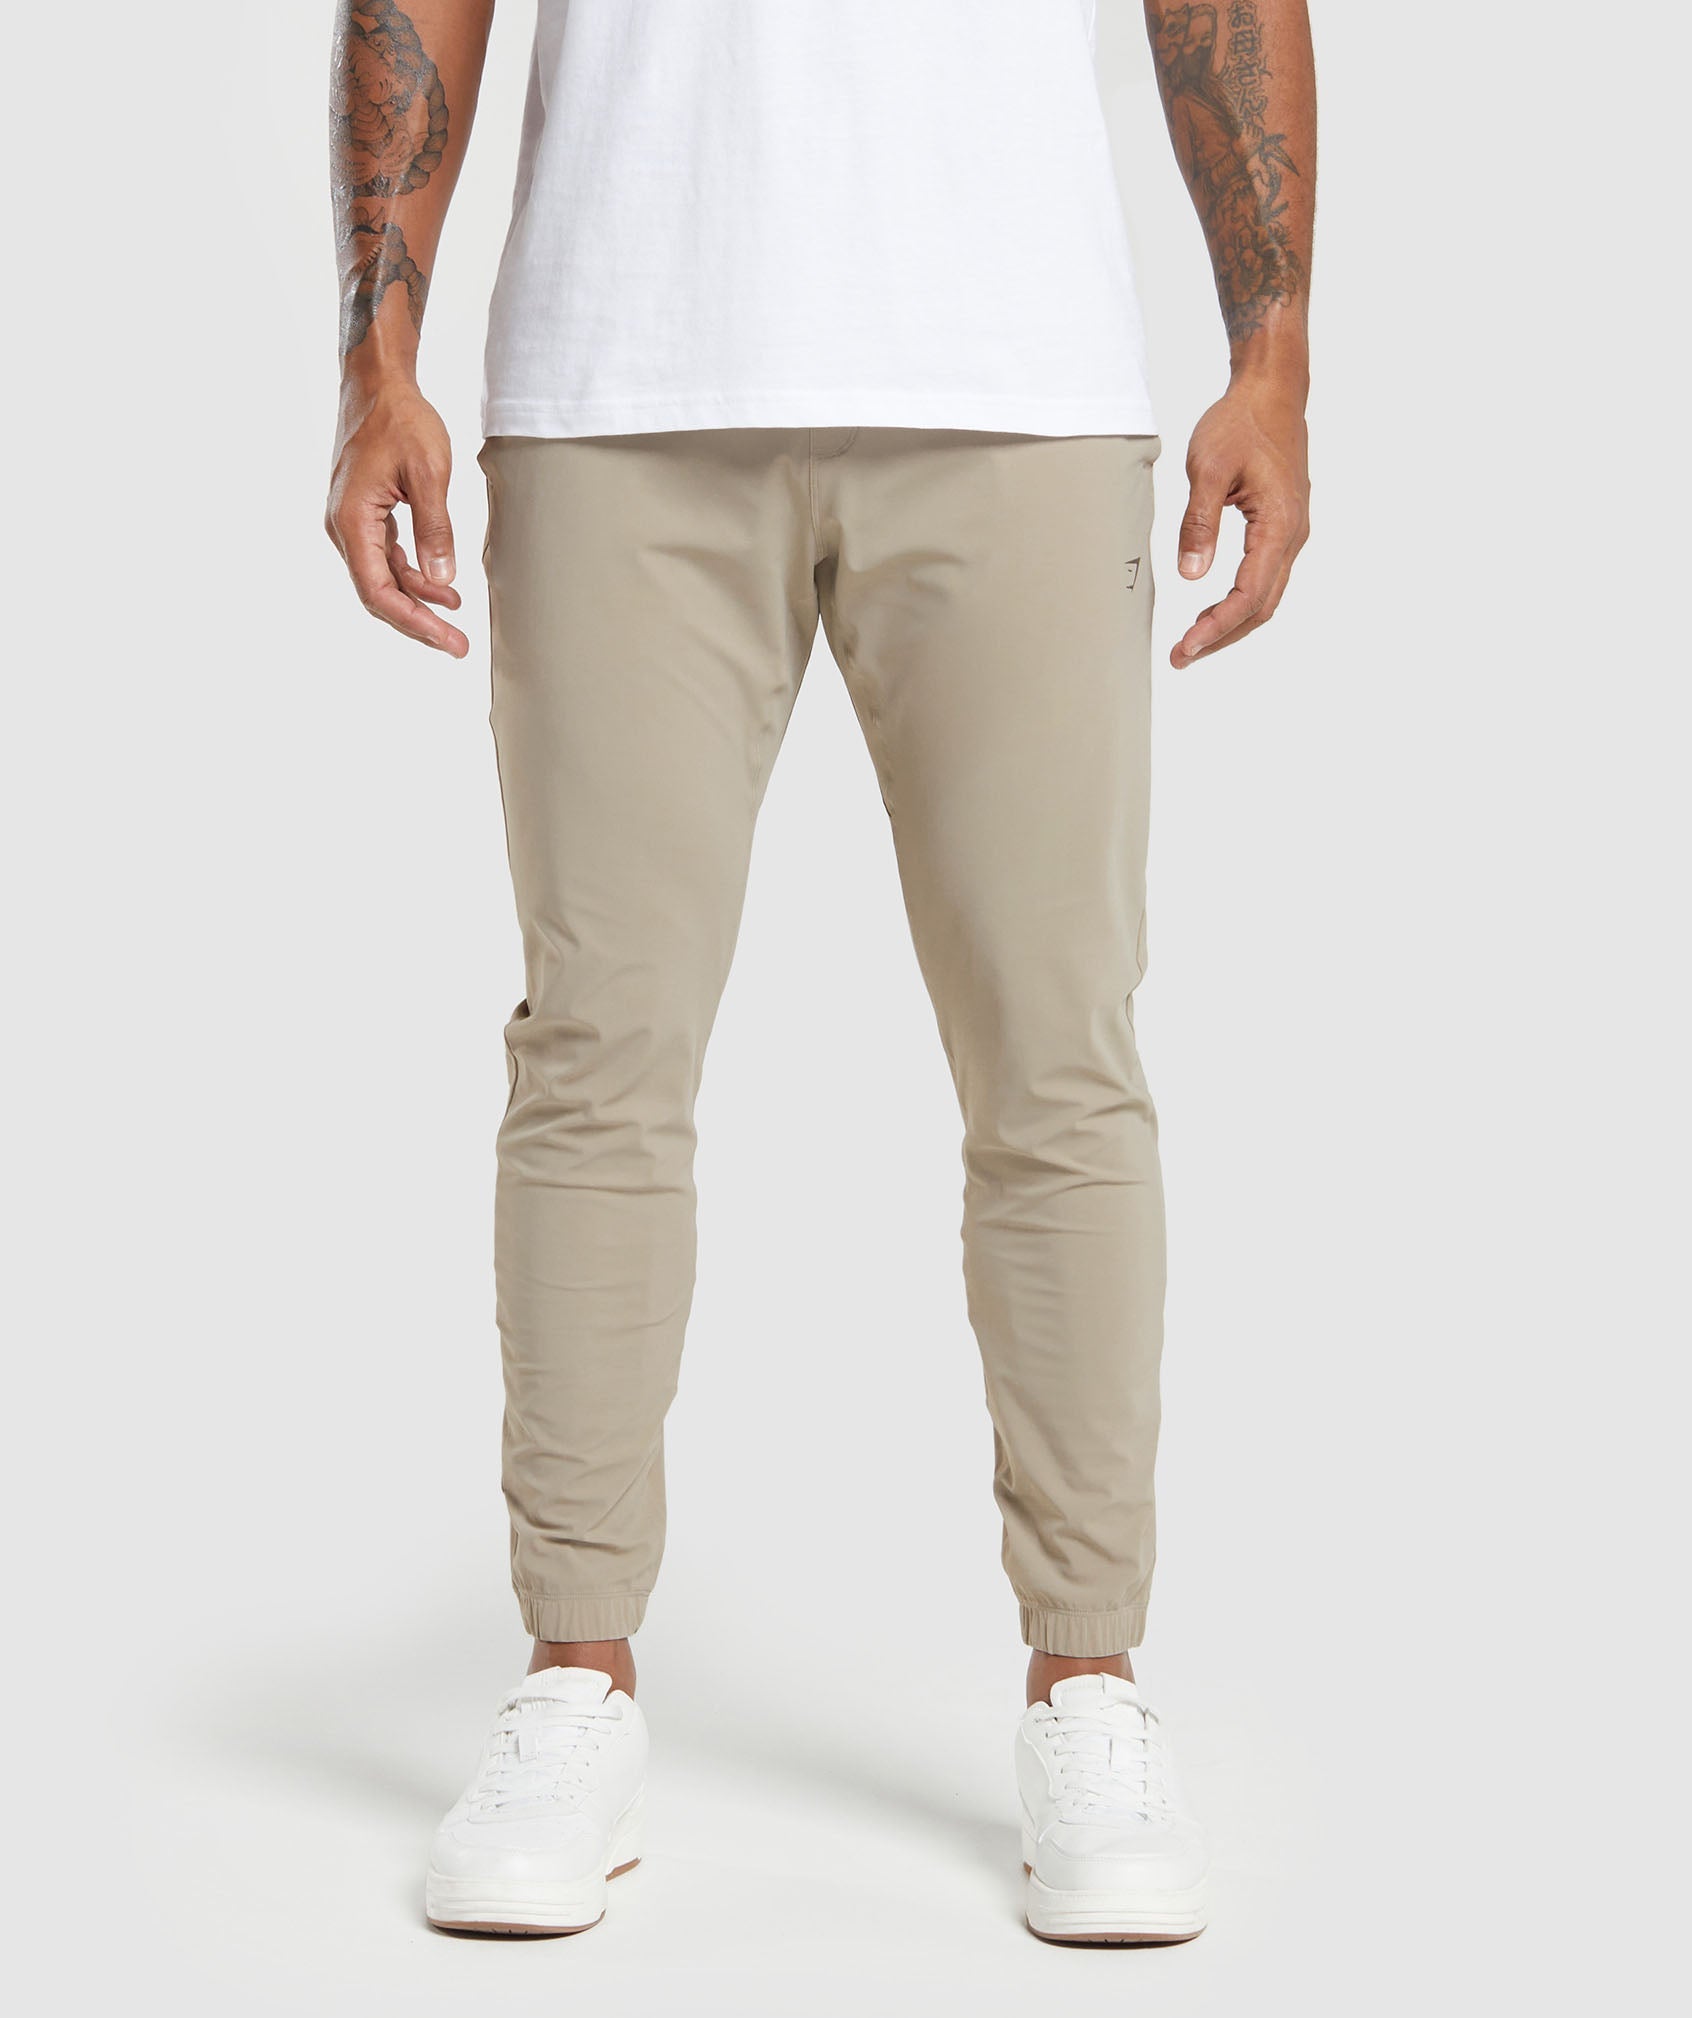 Studio Joggers in Sand Brown - view 1